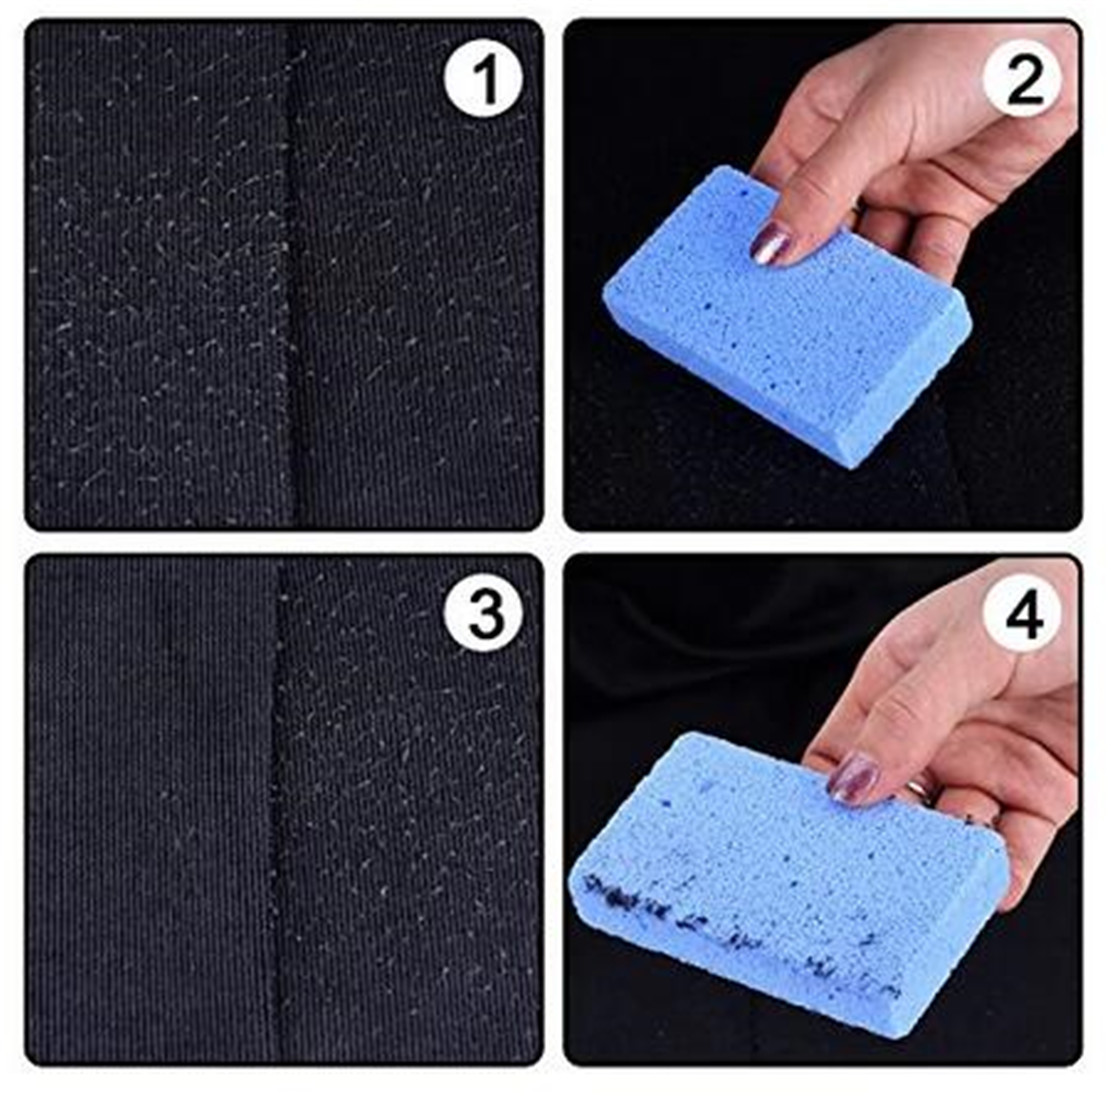 Women's Fuzz Free Lint Removing Clothing Care Sweater Saver Stone